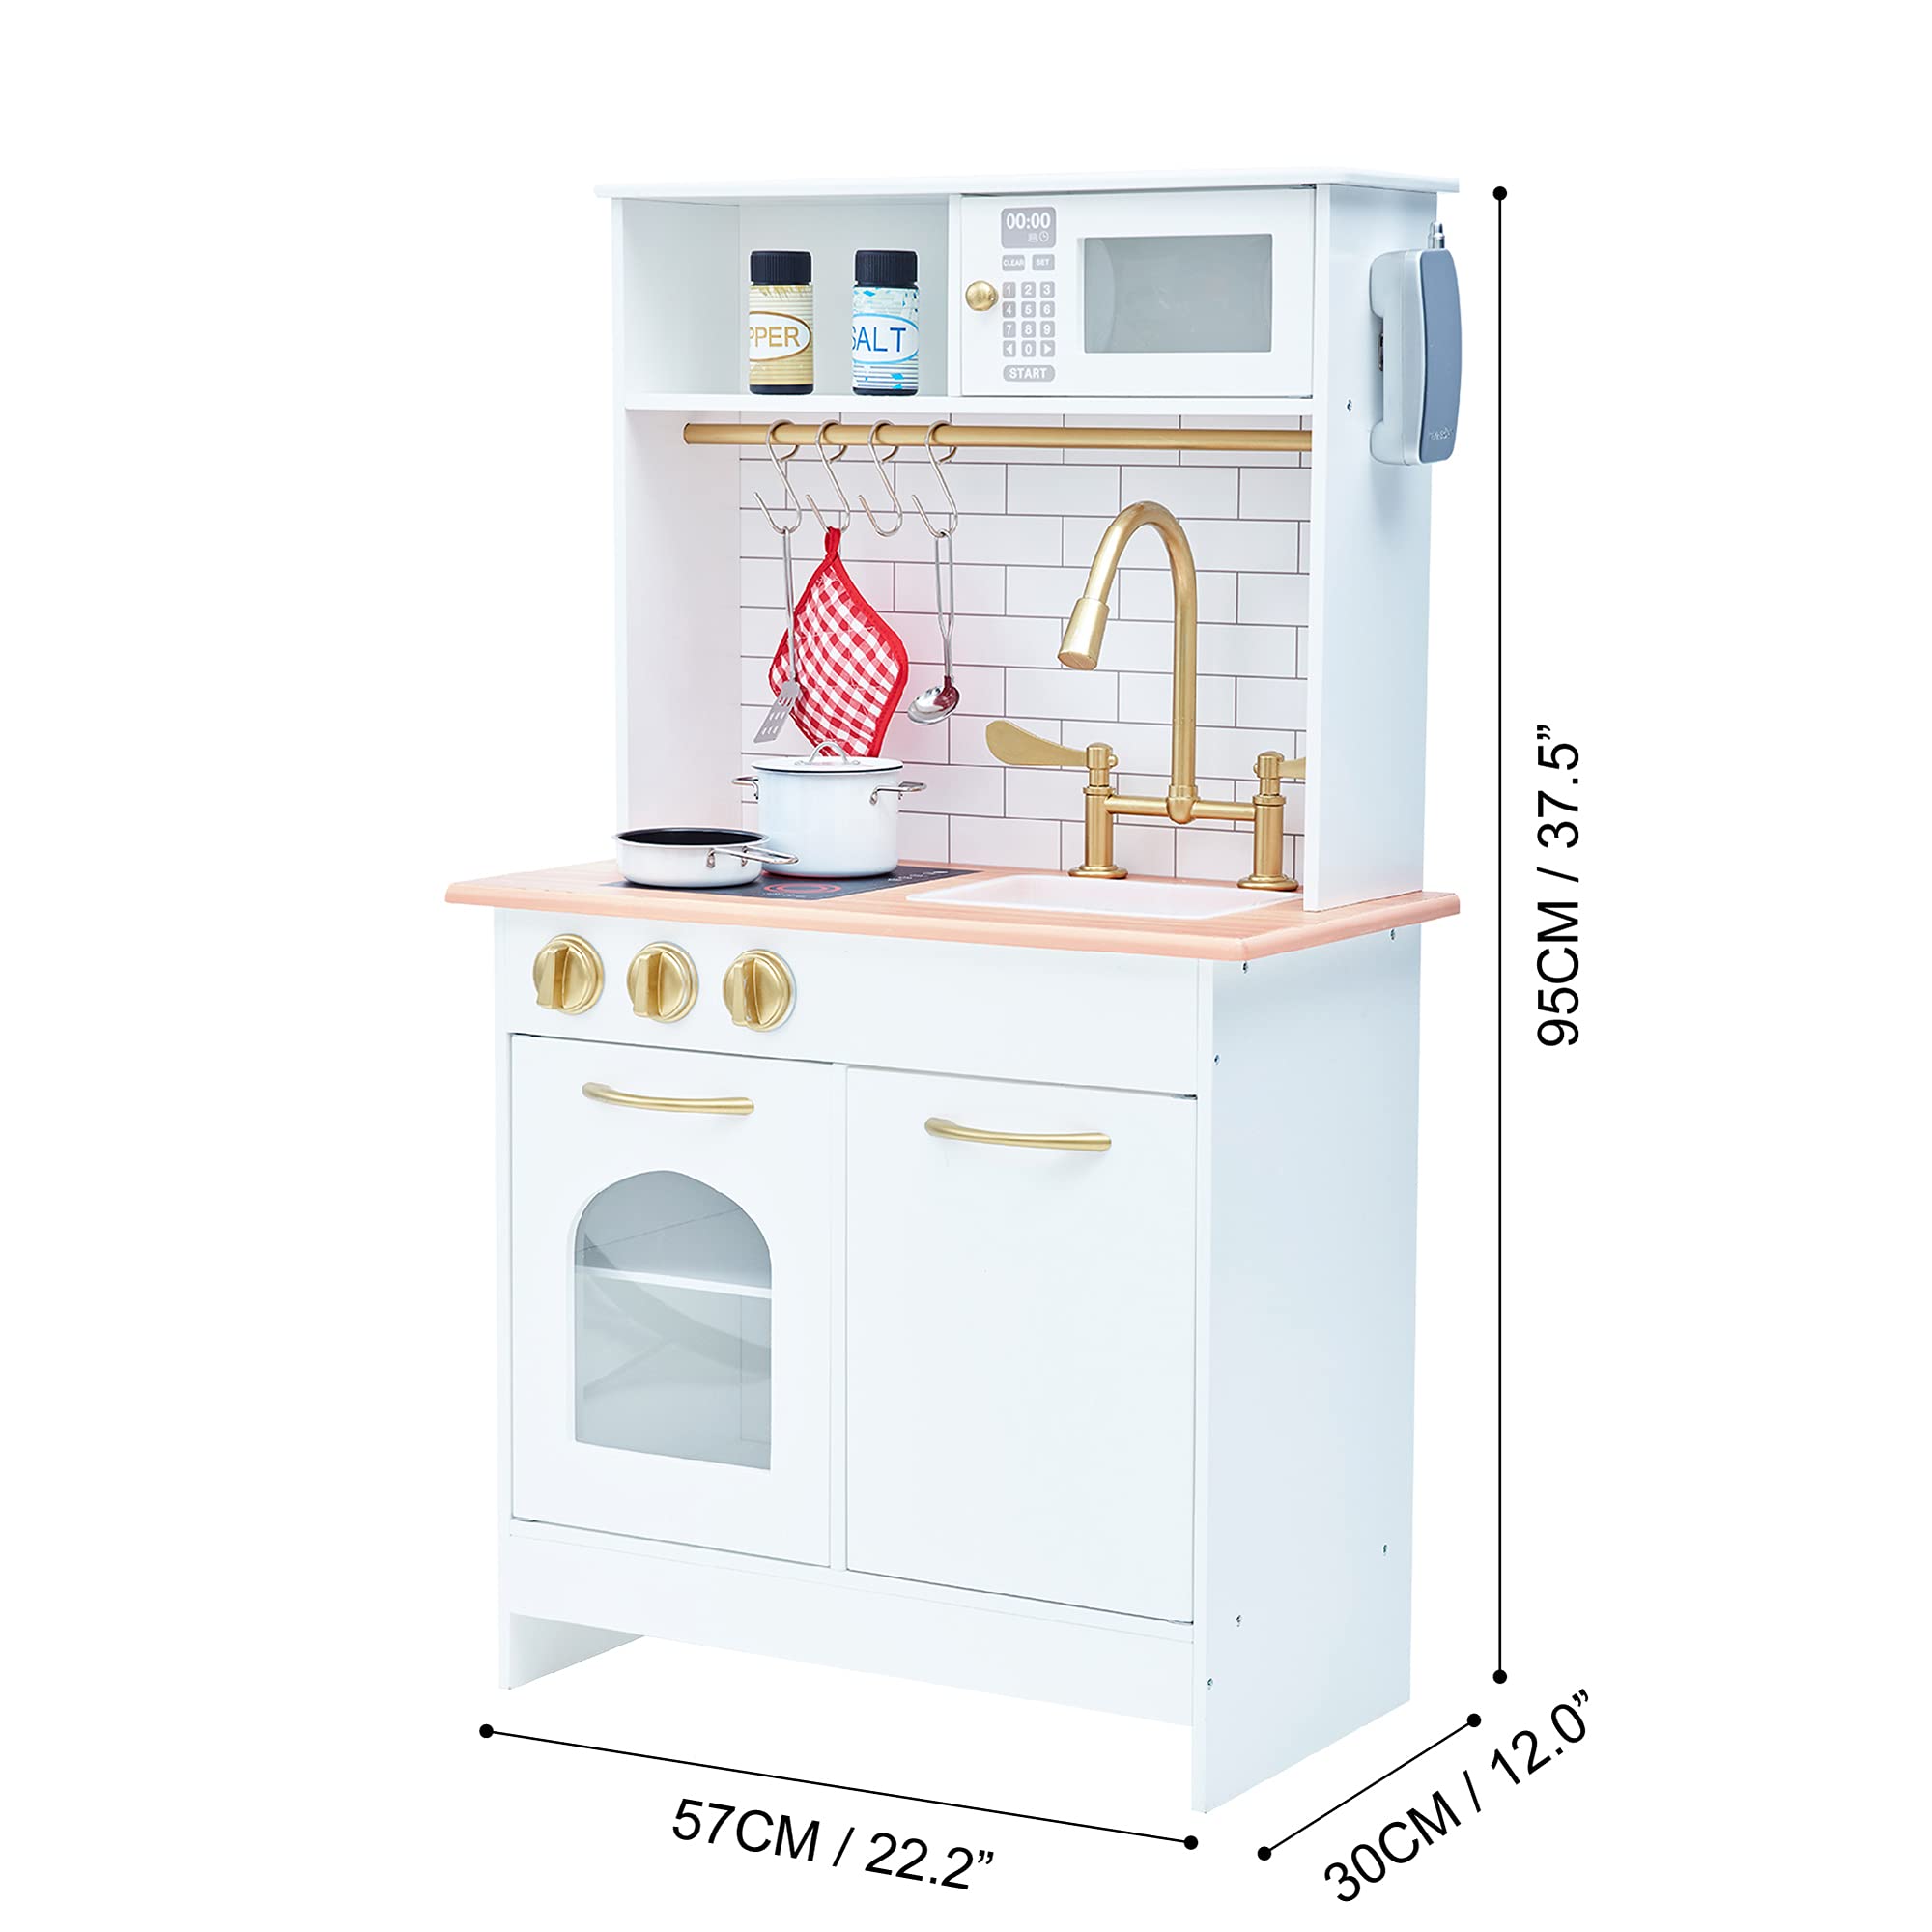 Teamson Kids Little Chef Boston Kids Play Kitchen Set with Play Phone & Cookware, Small Play Kitchen with Subway Tile Backsplash, White/Gold